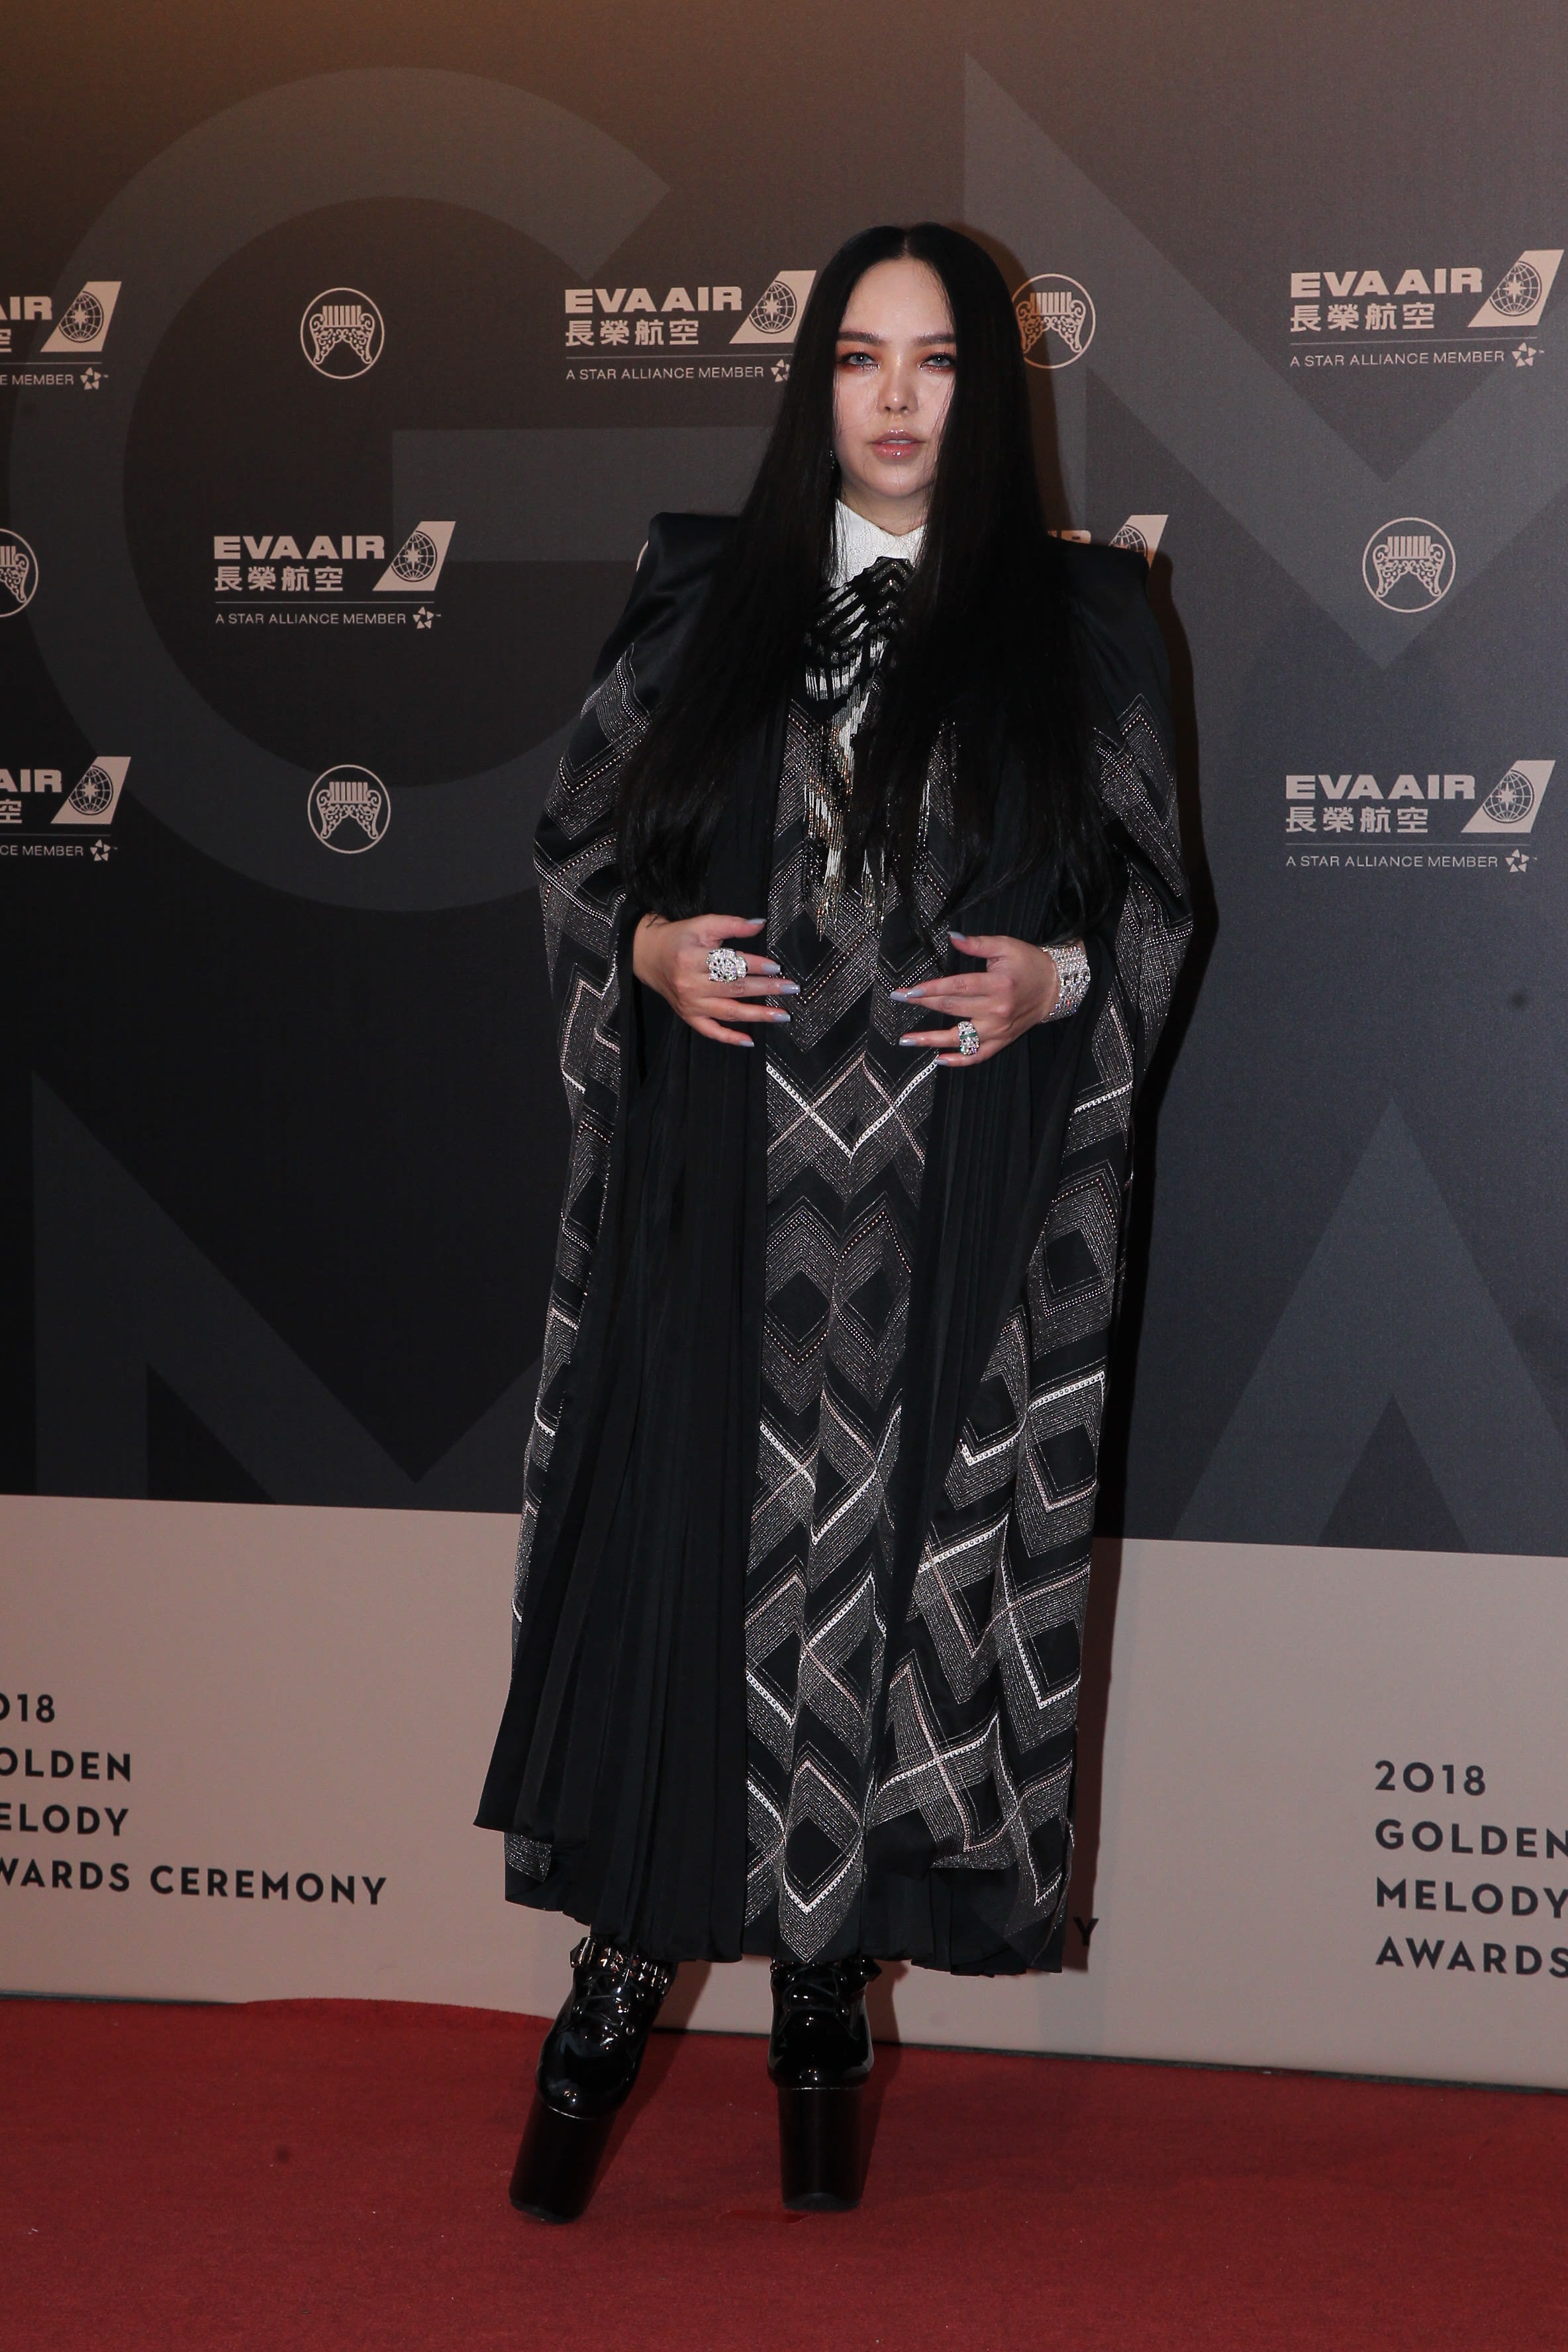 What In The World Was Amei Wearing At The 29th Golden Melody Awards?